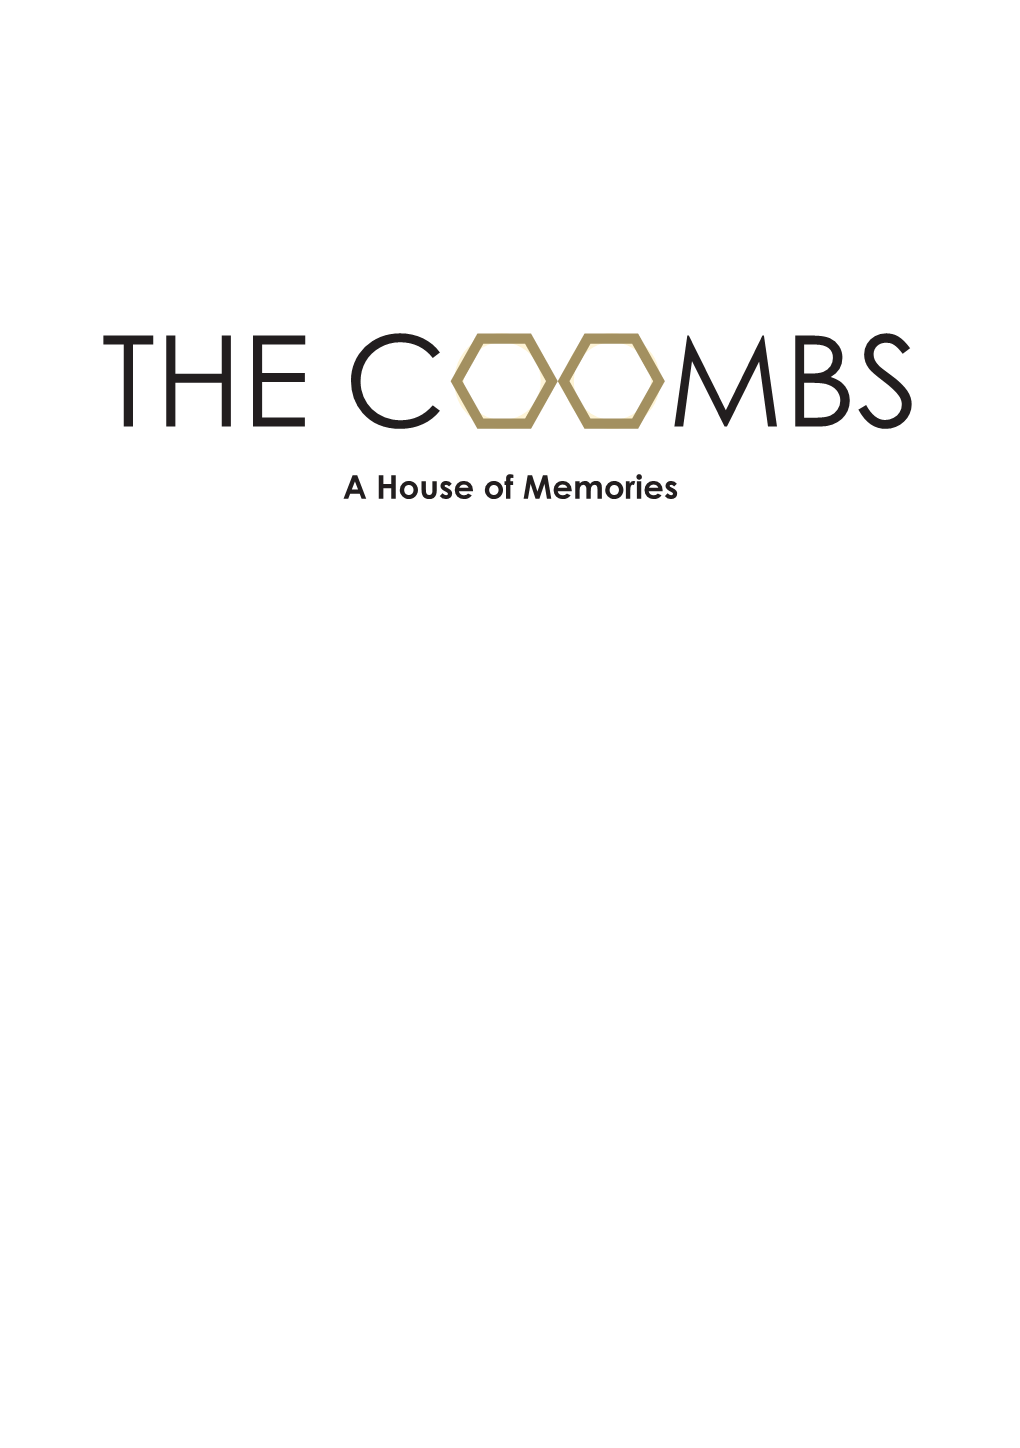 The Coombs: a House of Memories